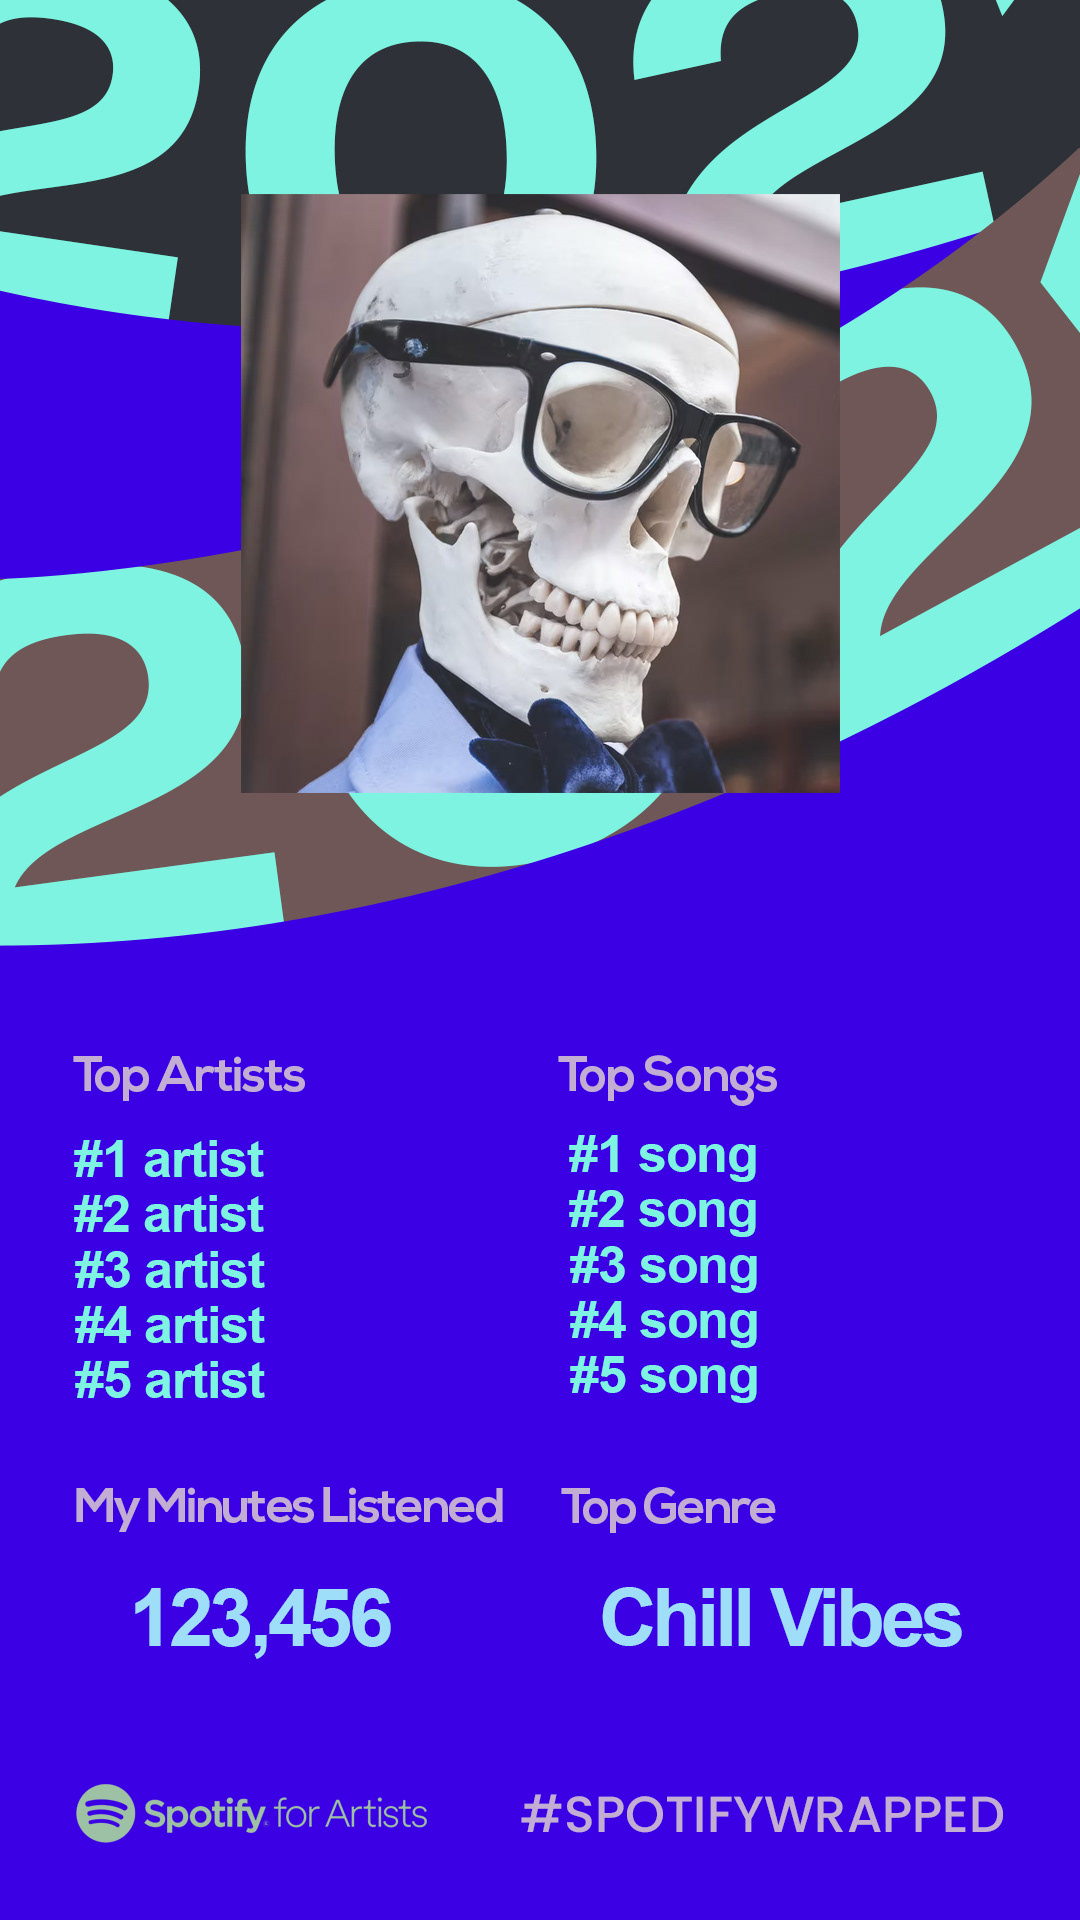 Spotify Wrapped Meme Template 2021 on Behance